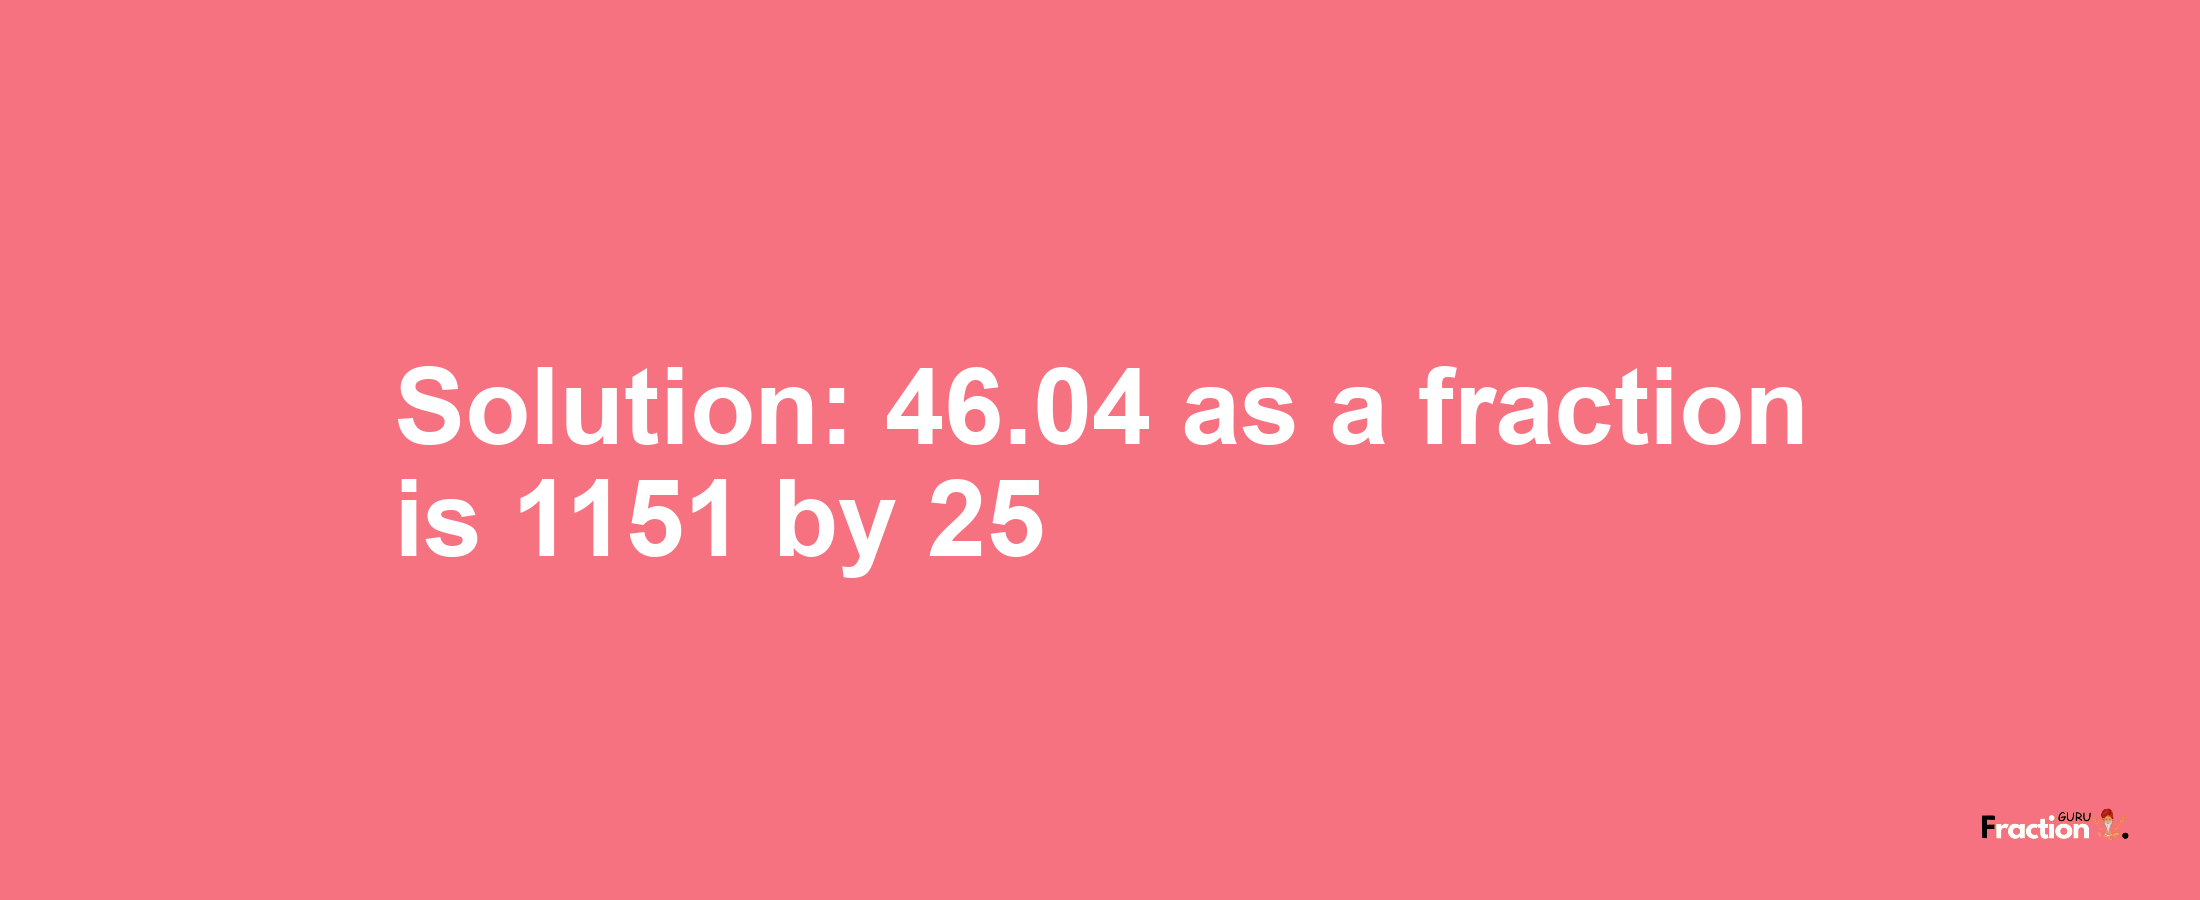 Solution:46.04 as a fraction is 1151/25